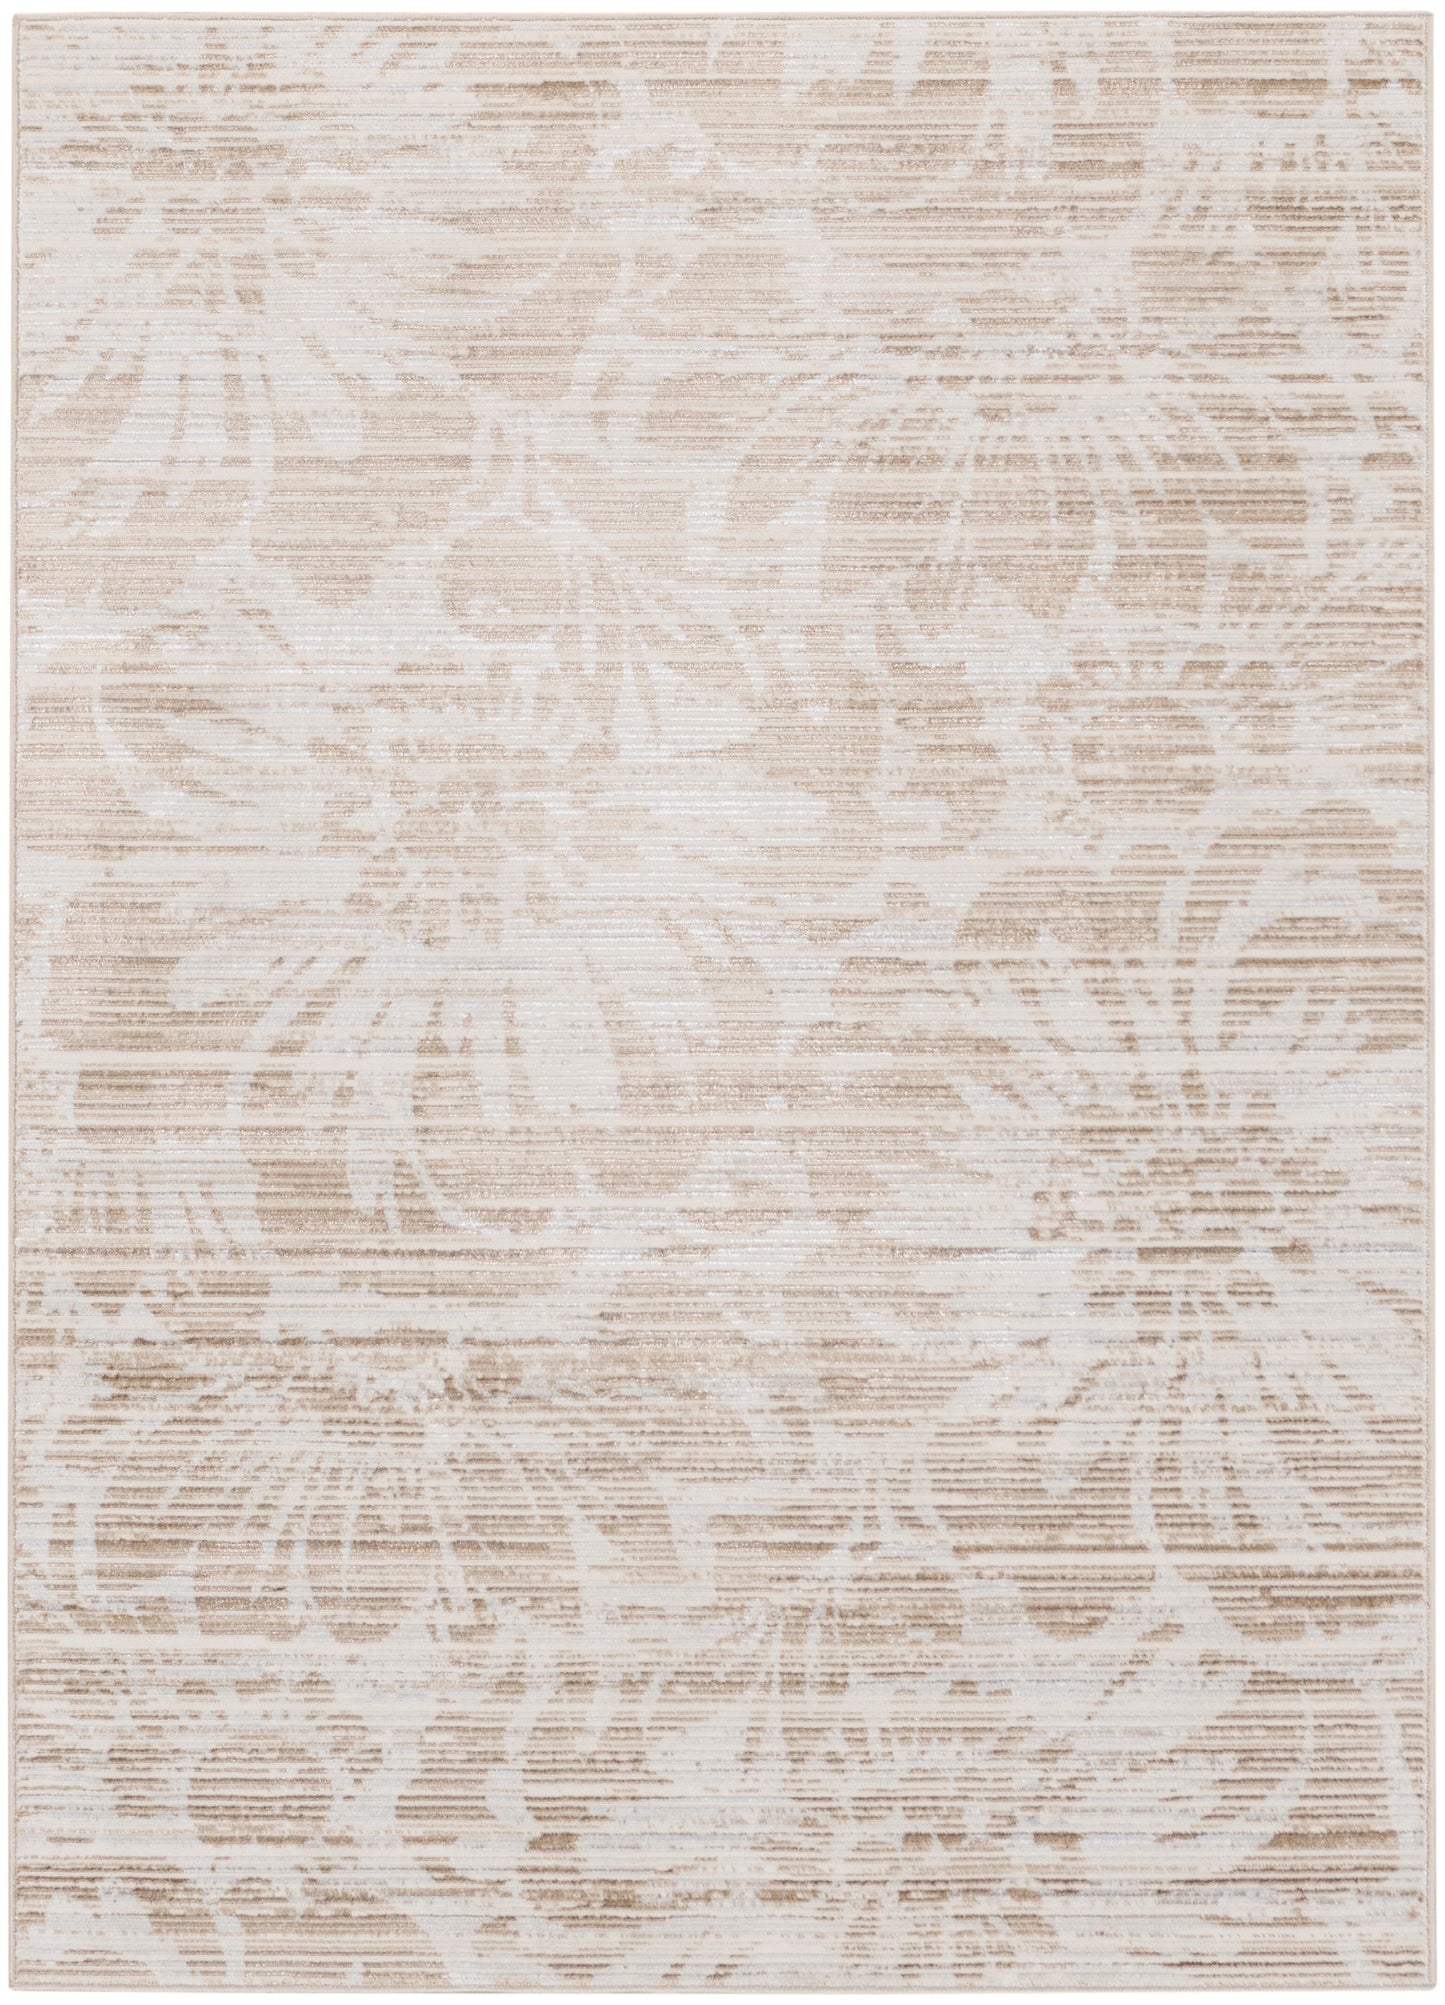 Inspire Me! Home Décor Iliana ILI02 Ivory Grey with Gold Accents  Contemporary Machinemade Rug